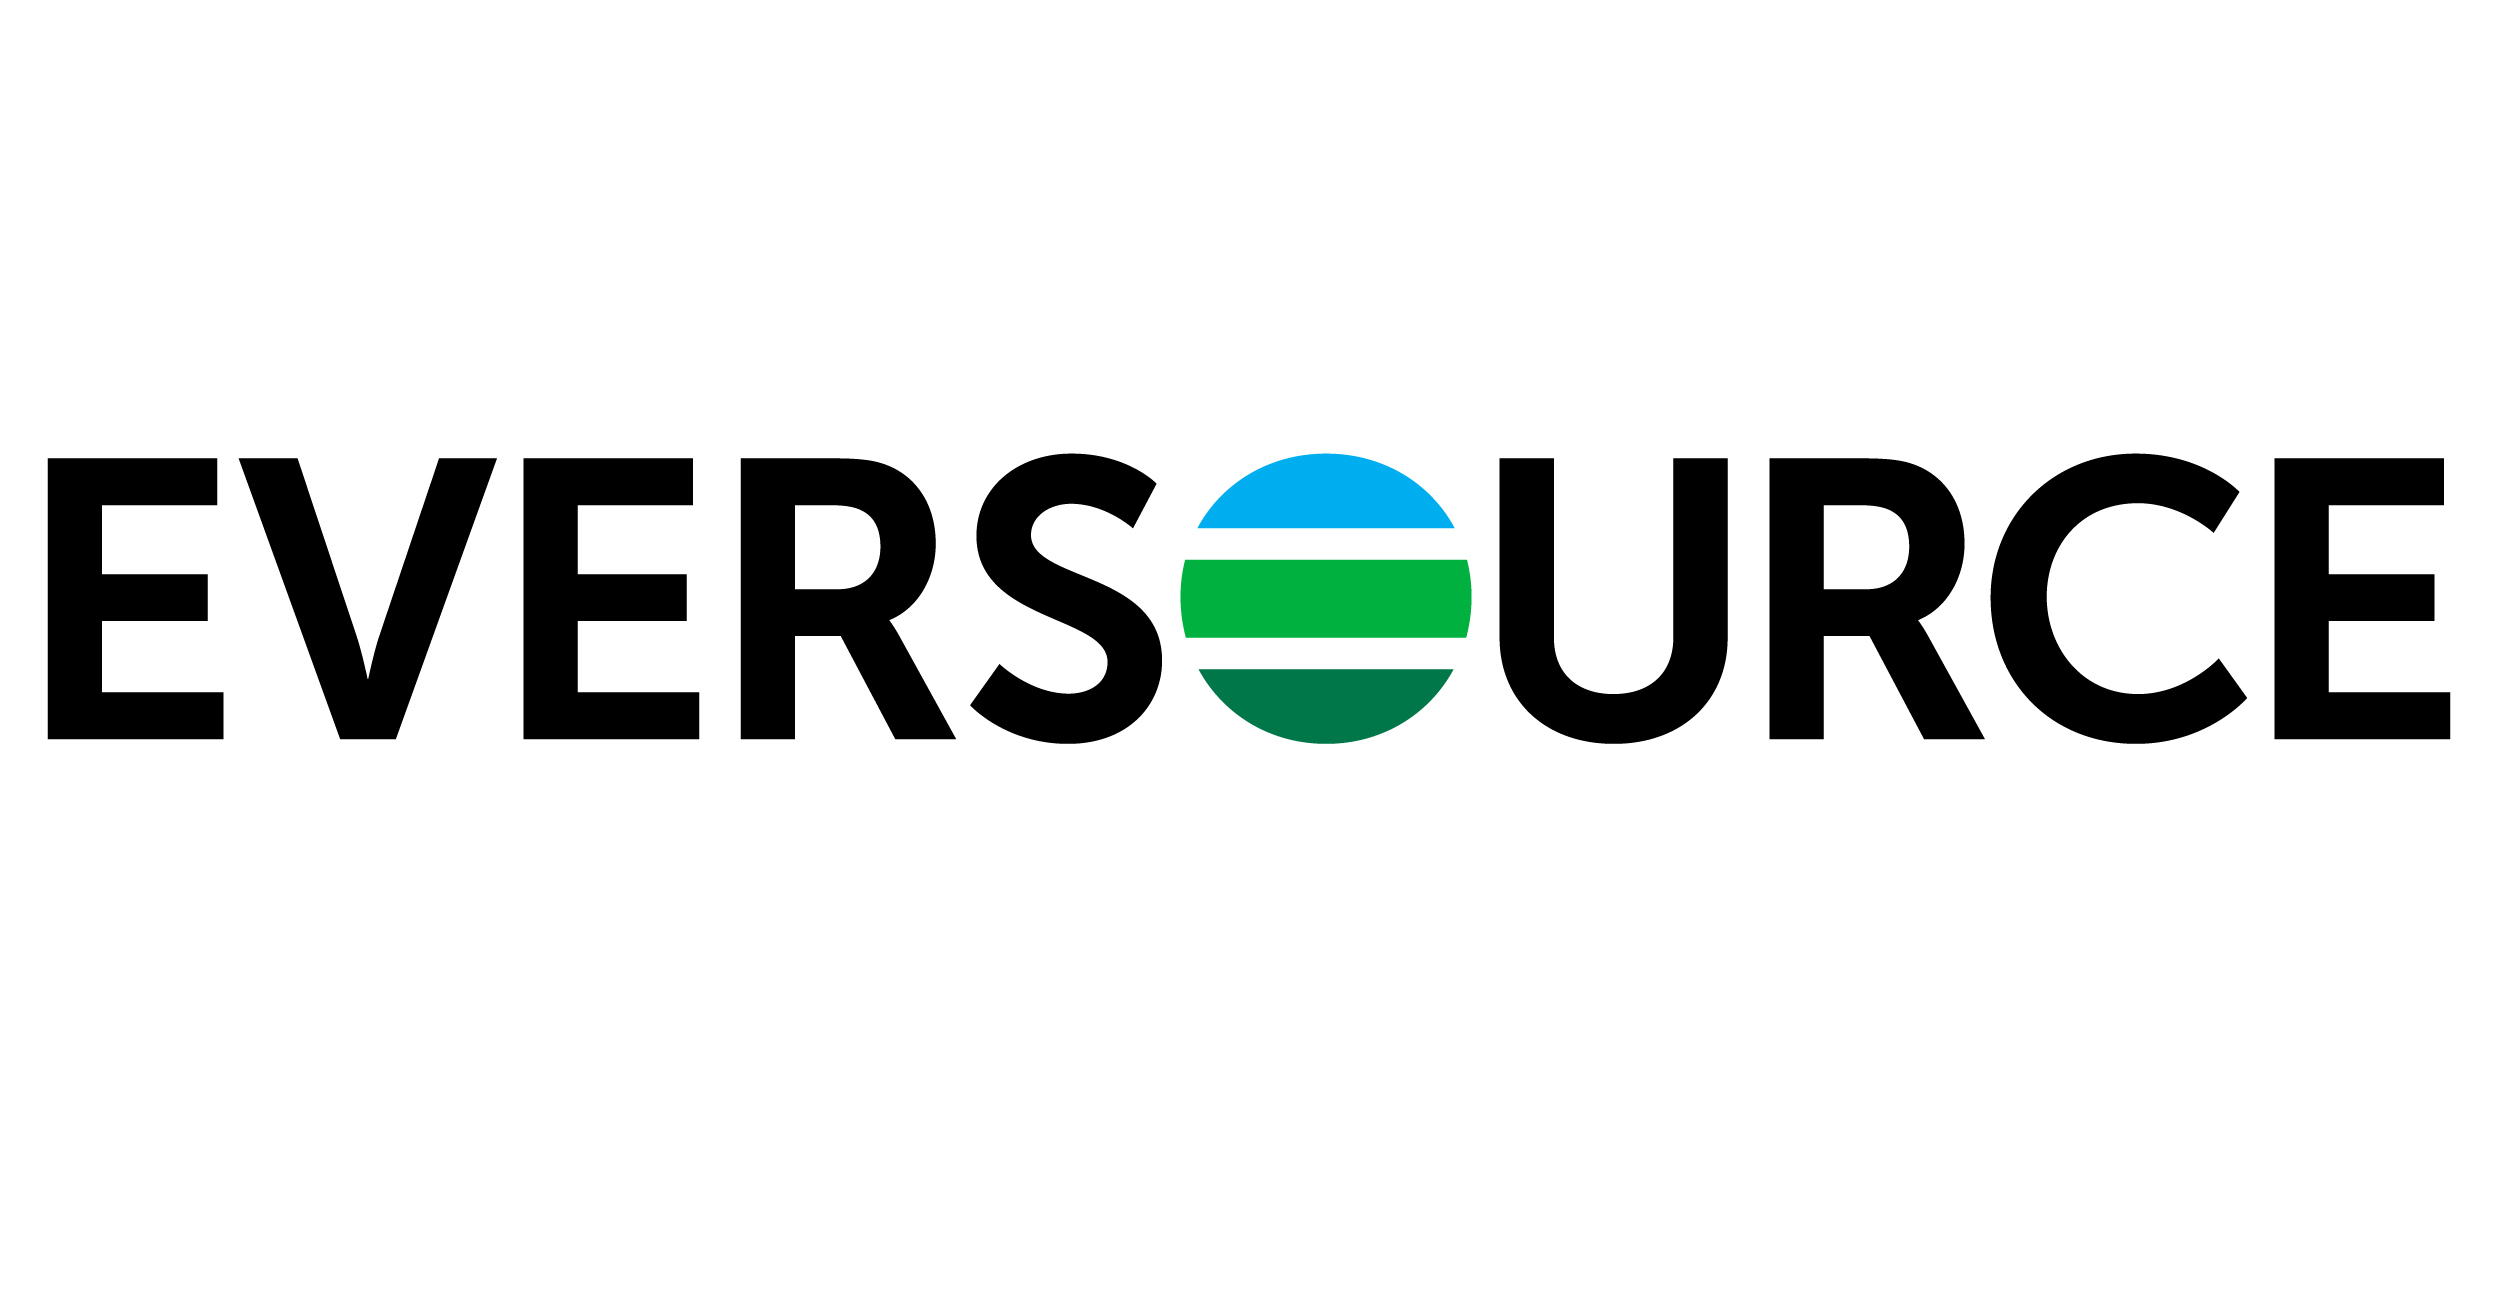 A logo of versouris with the word versour in it.